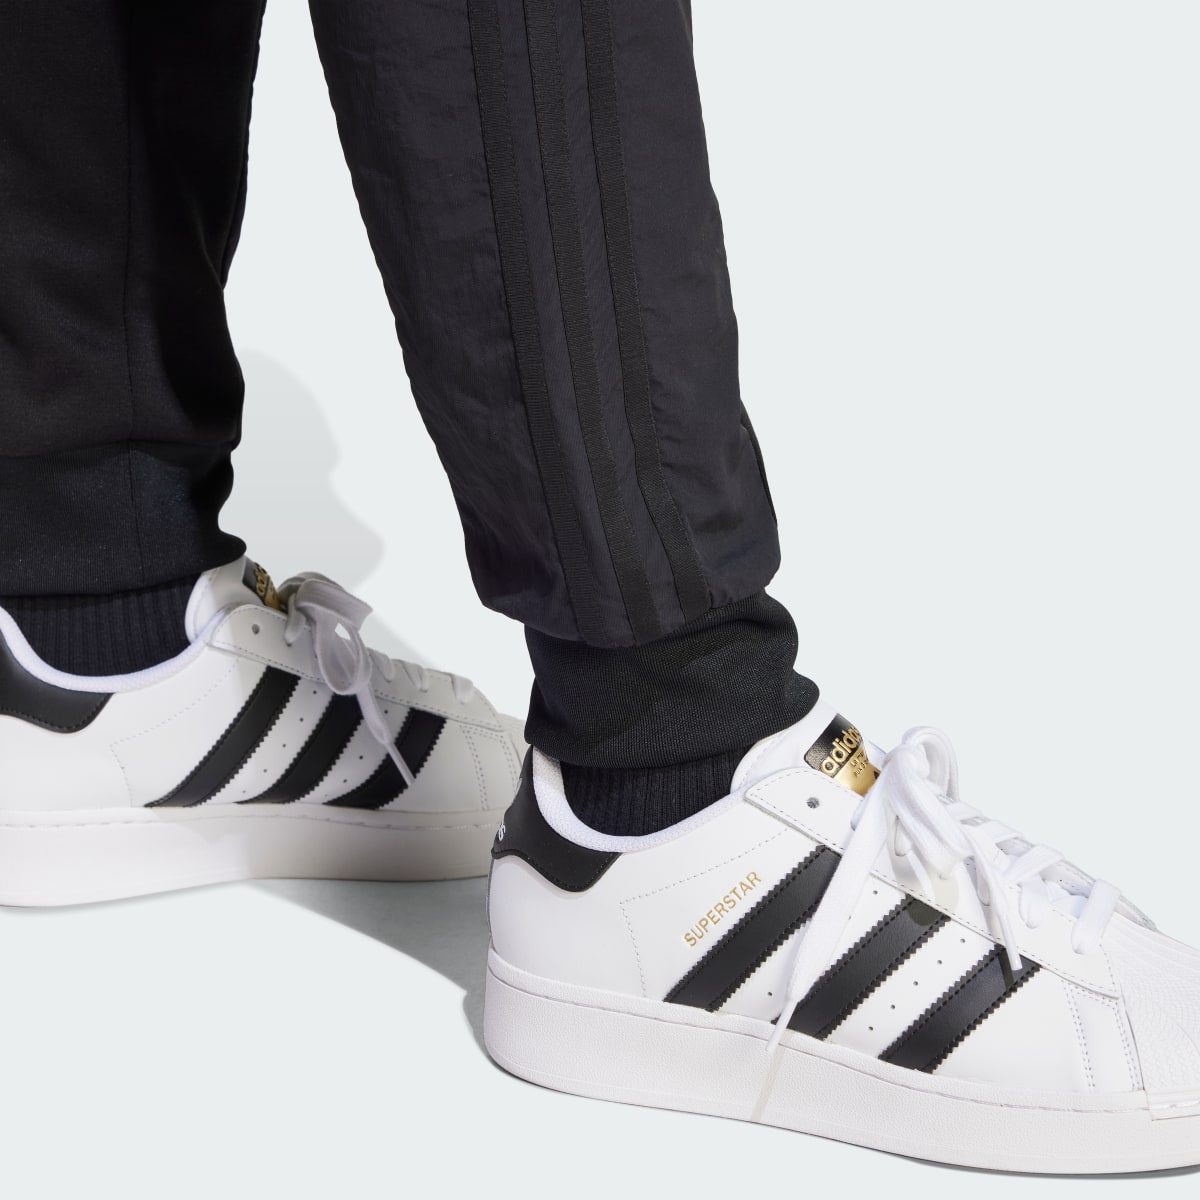 Adidas Track pants adicolor Re-Pro SST Material Mix. 6